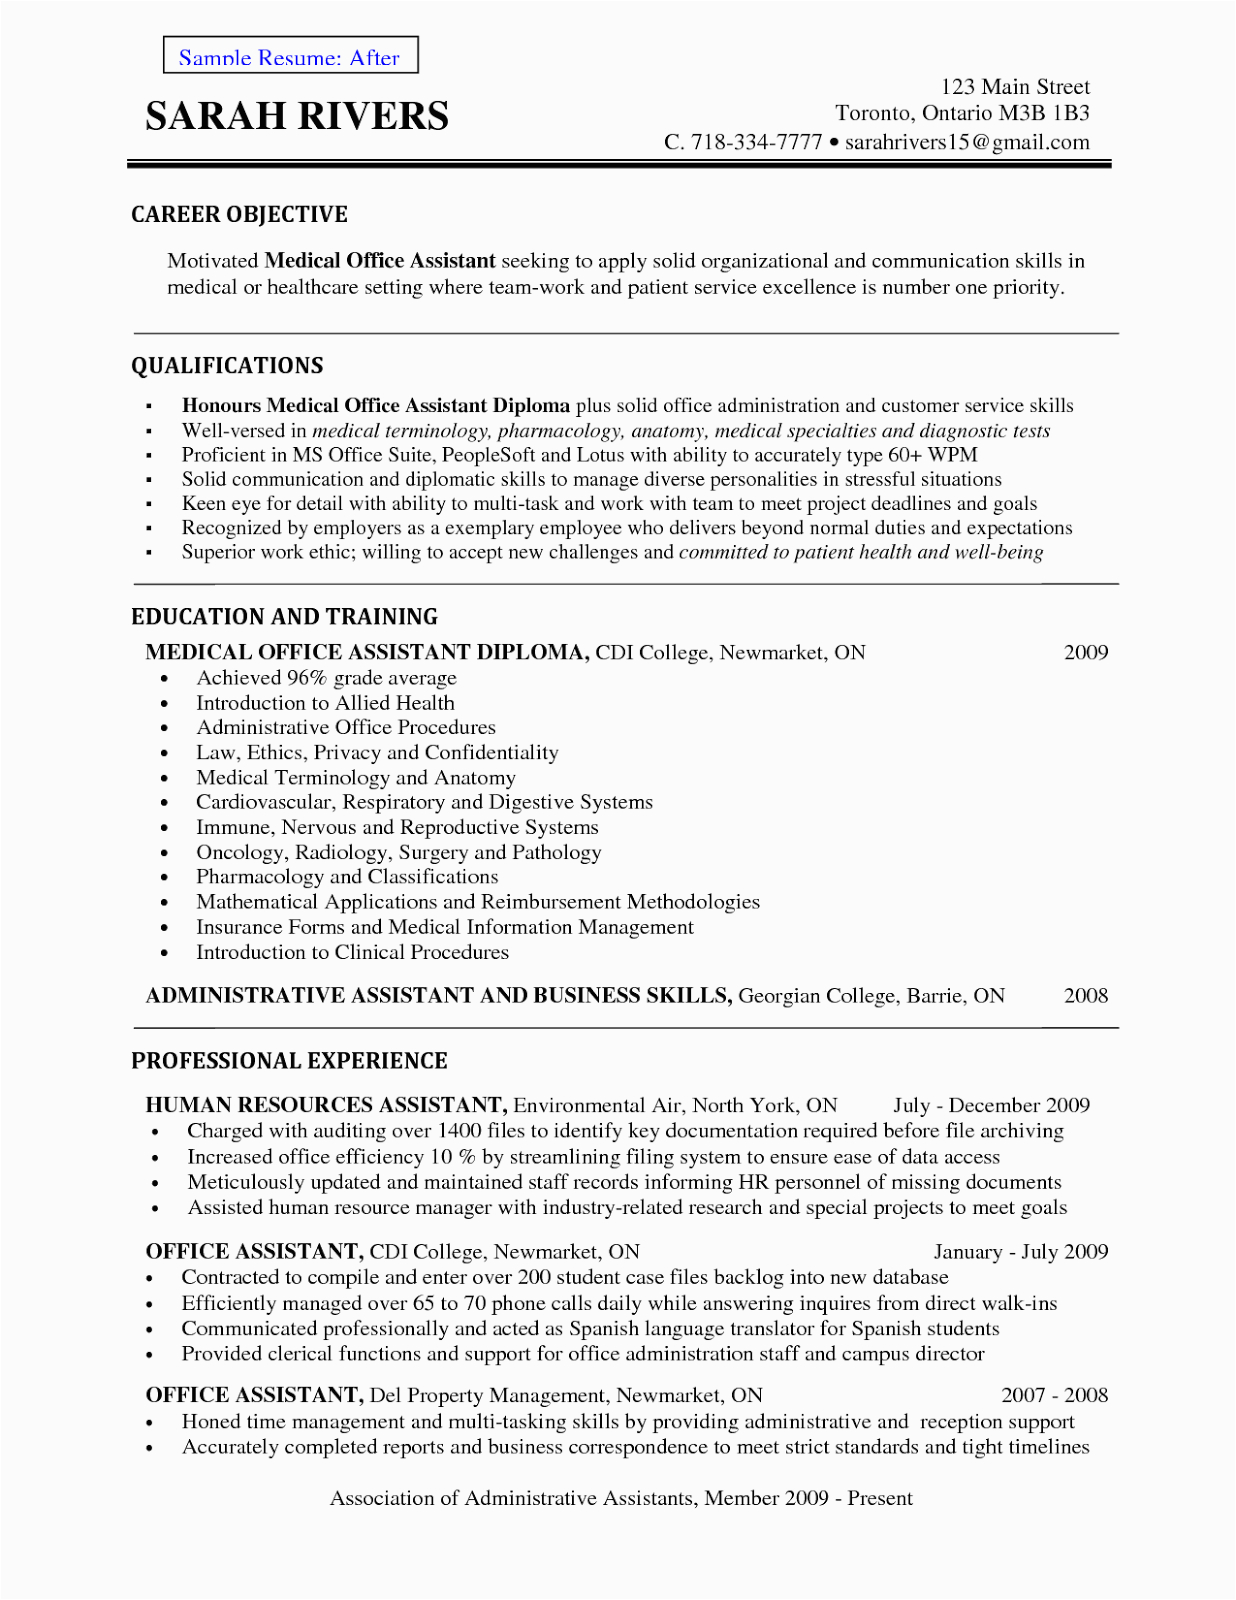 Quick Job Objectives for A Resume Samples Objective Resume Examples Medical assistant Tipss Und Vorlagen